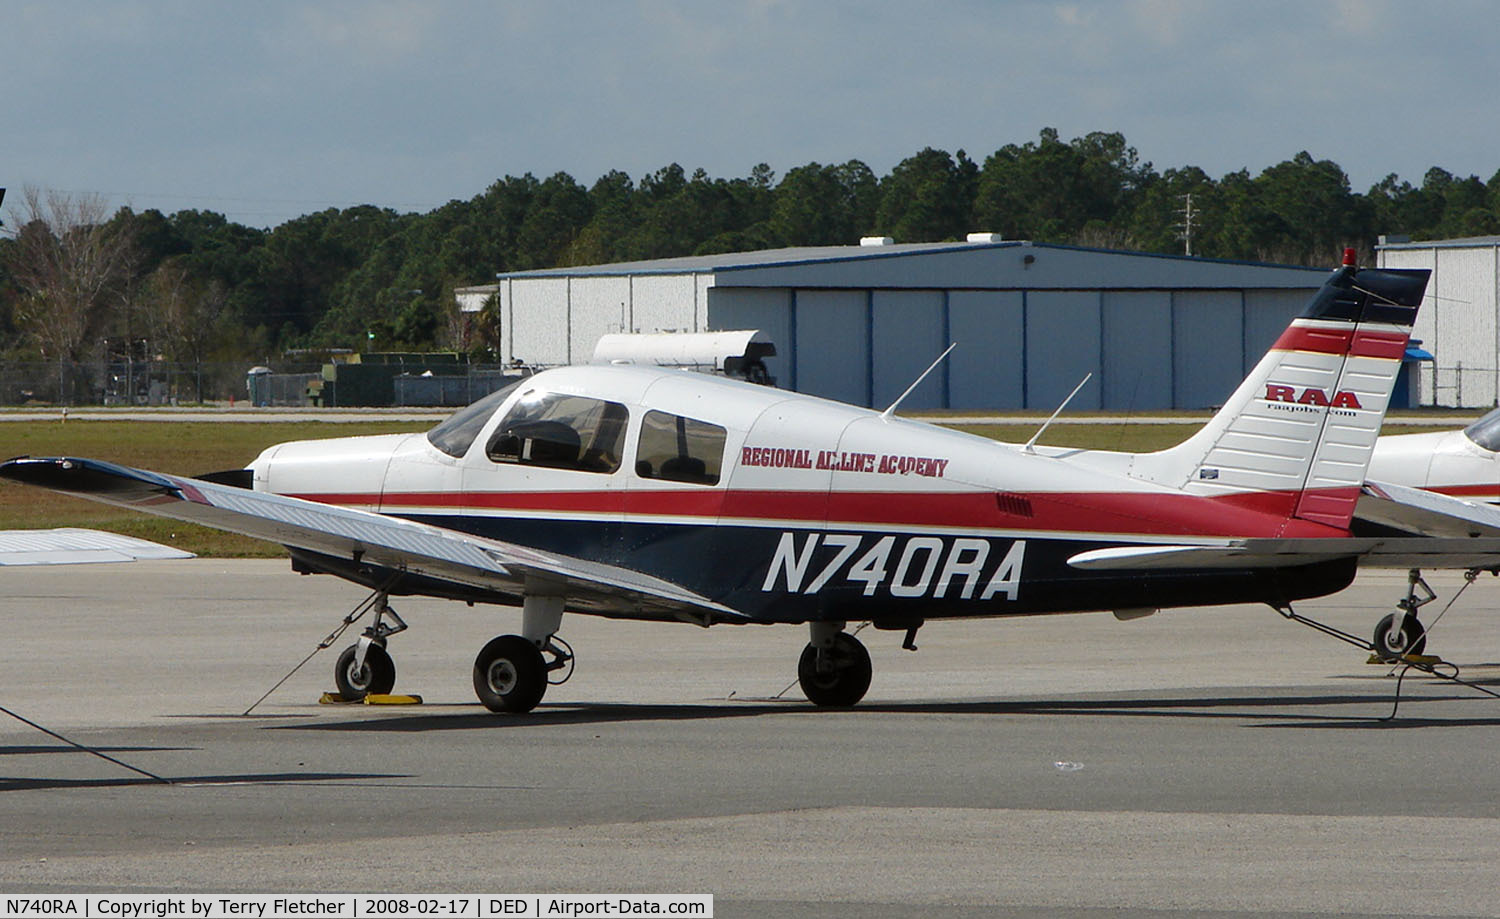 N740RA, 1990 Piper PA-28-161 C/N 2841325, This Piper belongs to the Flying Academy based at Deland , Florida